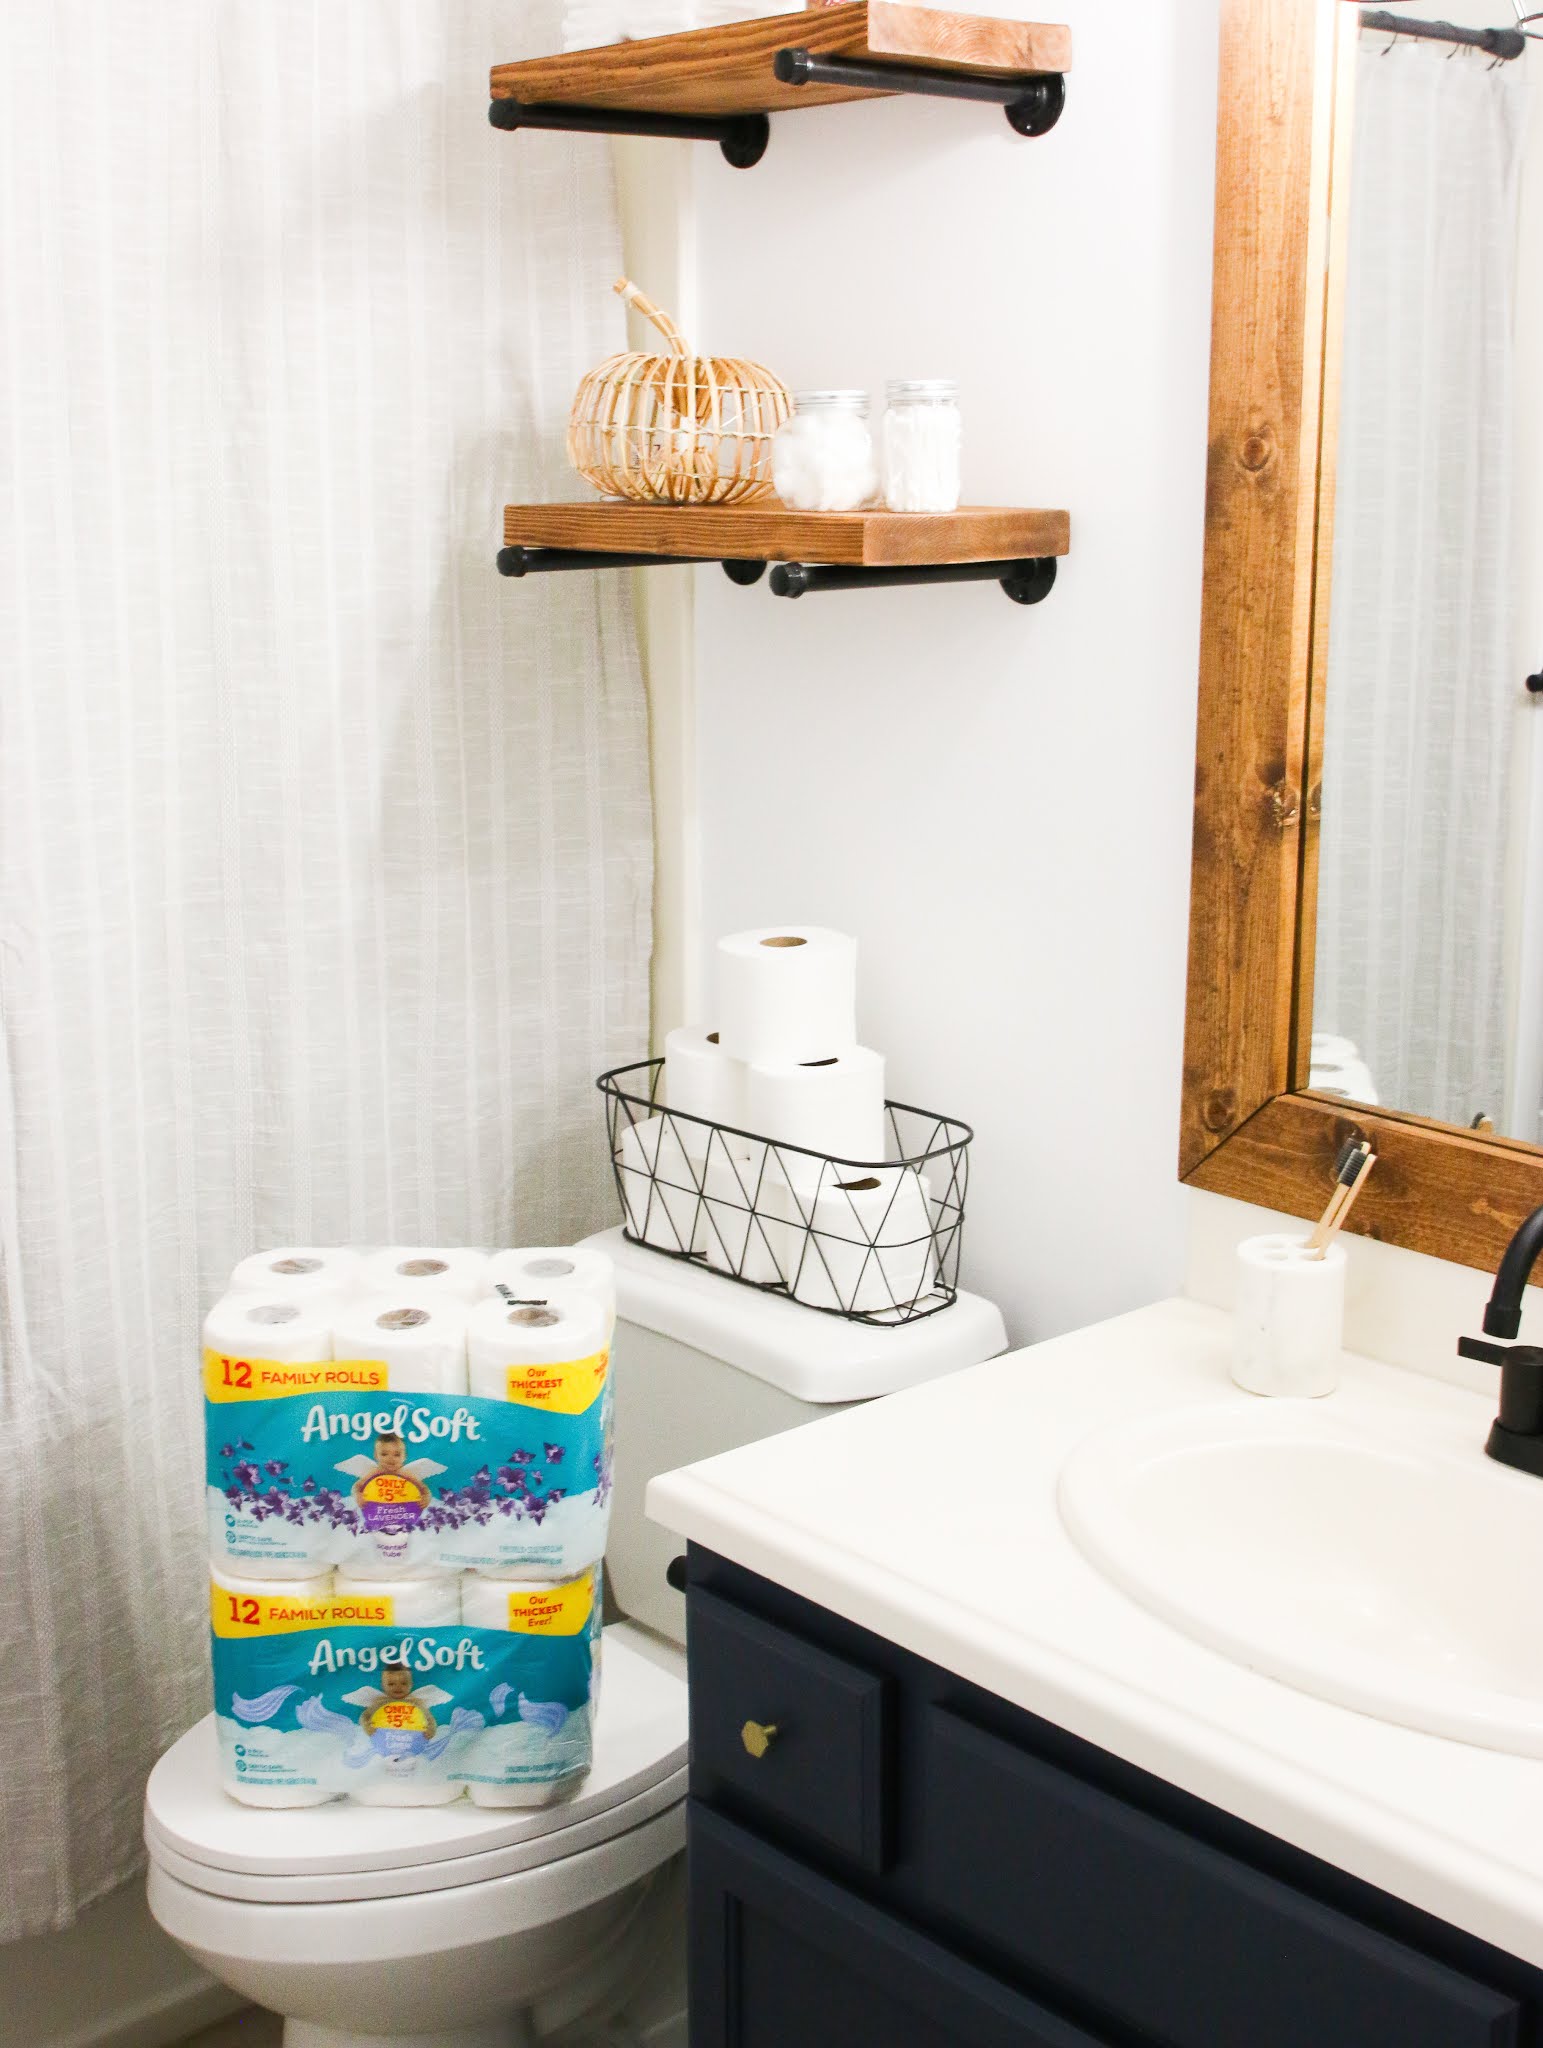 How to make a guest bathroom welcoming. Guest bathroom checklist. Bathroom essentials list. Guest bathroom toiletry basket. Guest bathroom ideas. Guest bathroom decor. Powder room essentials. Guest bathroom shower ideas. #bathroom #guestbathroom #holiday #homedecor #home